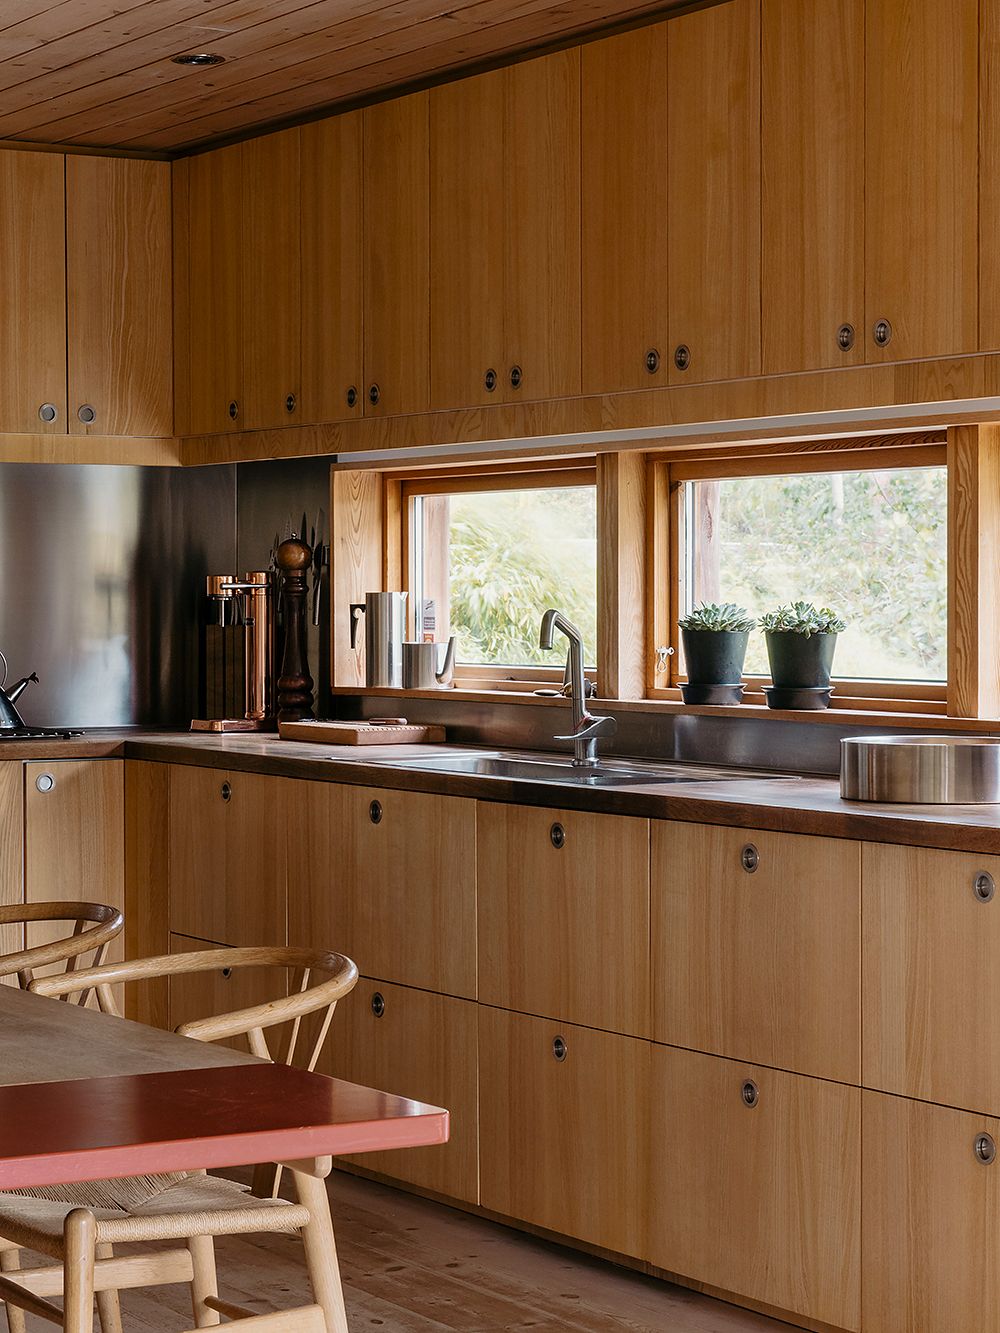 A view of the kitchen with wooden cabinets